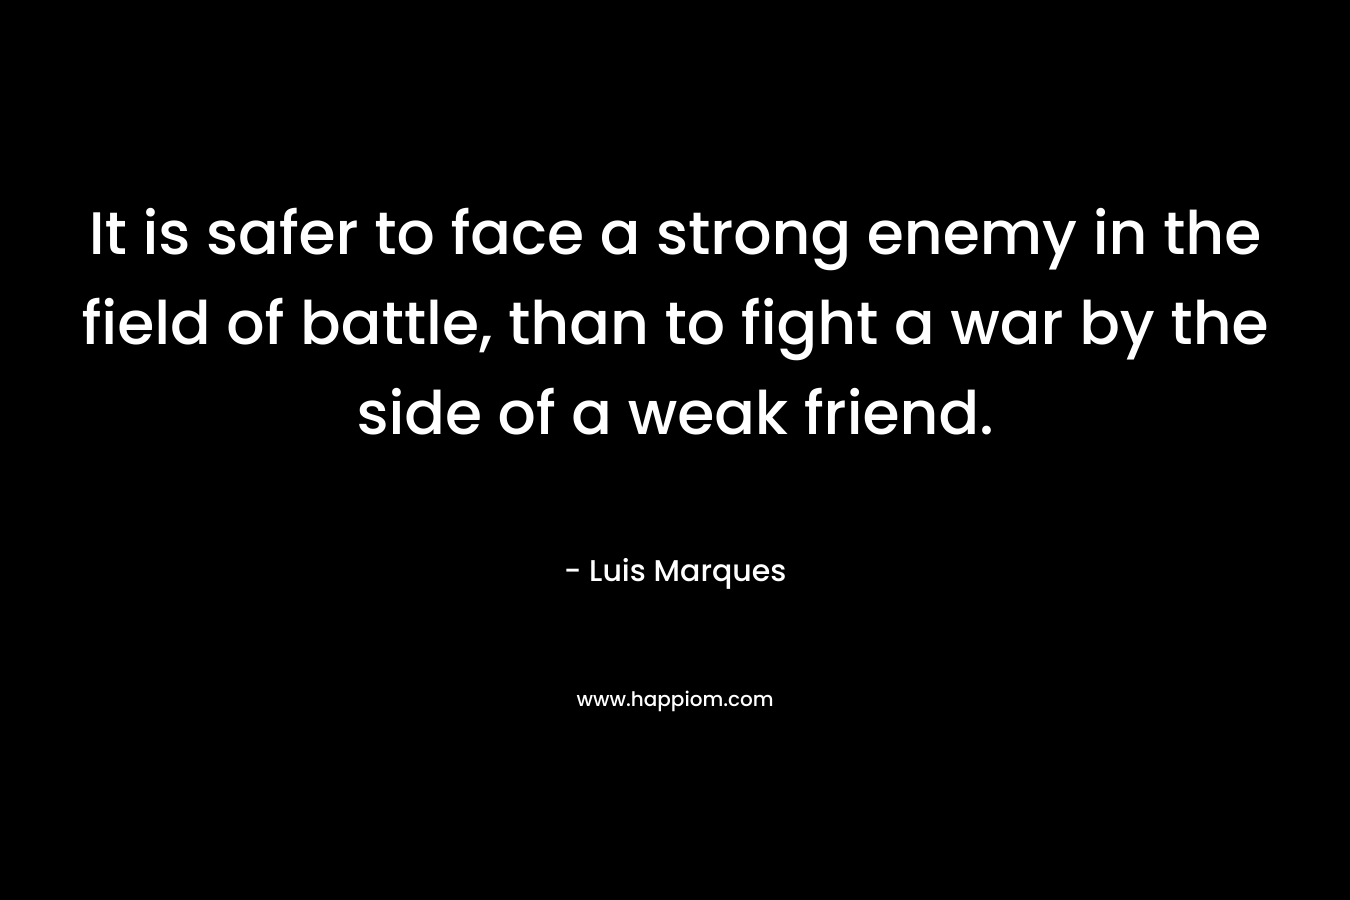 It is safer to face a strong enemy in the field of battle, than to fight a war by the side of a weak friend. – Luis Marques